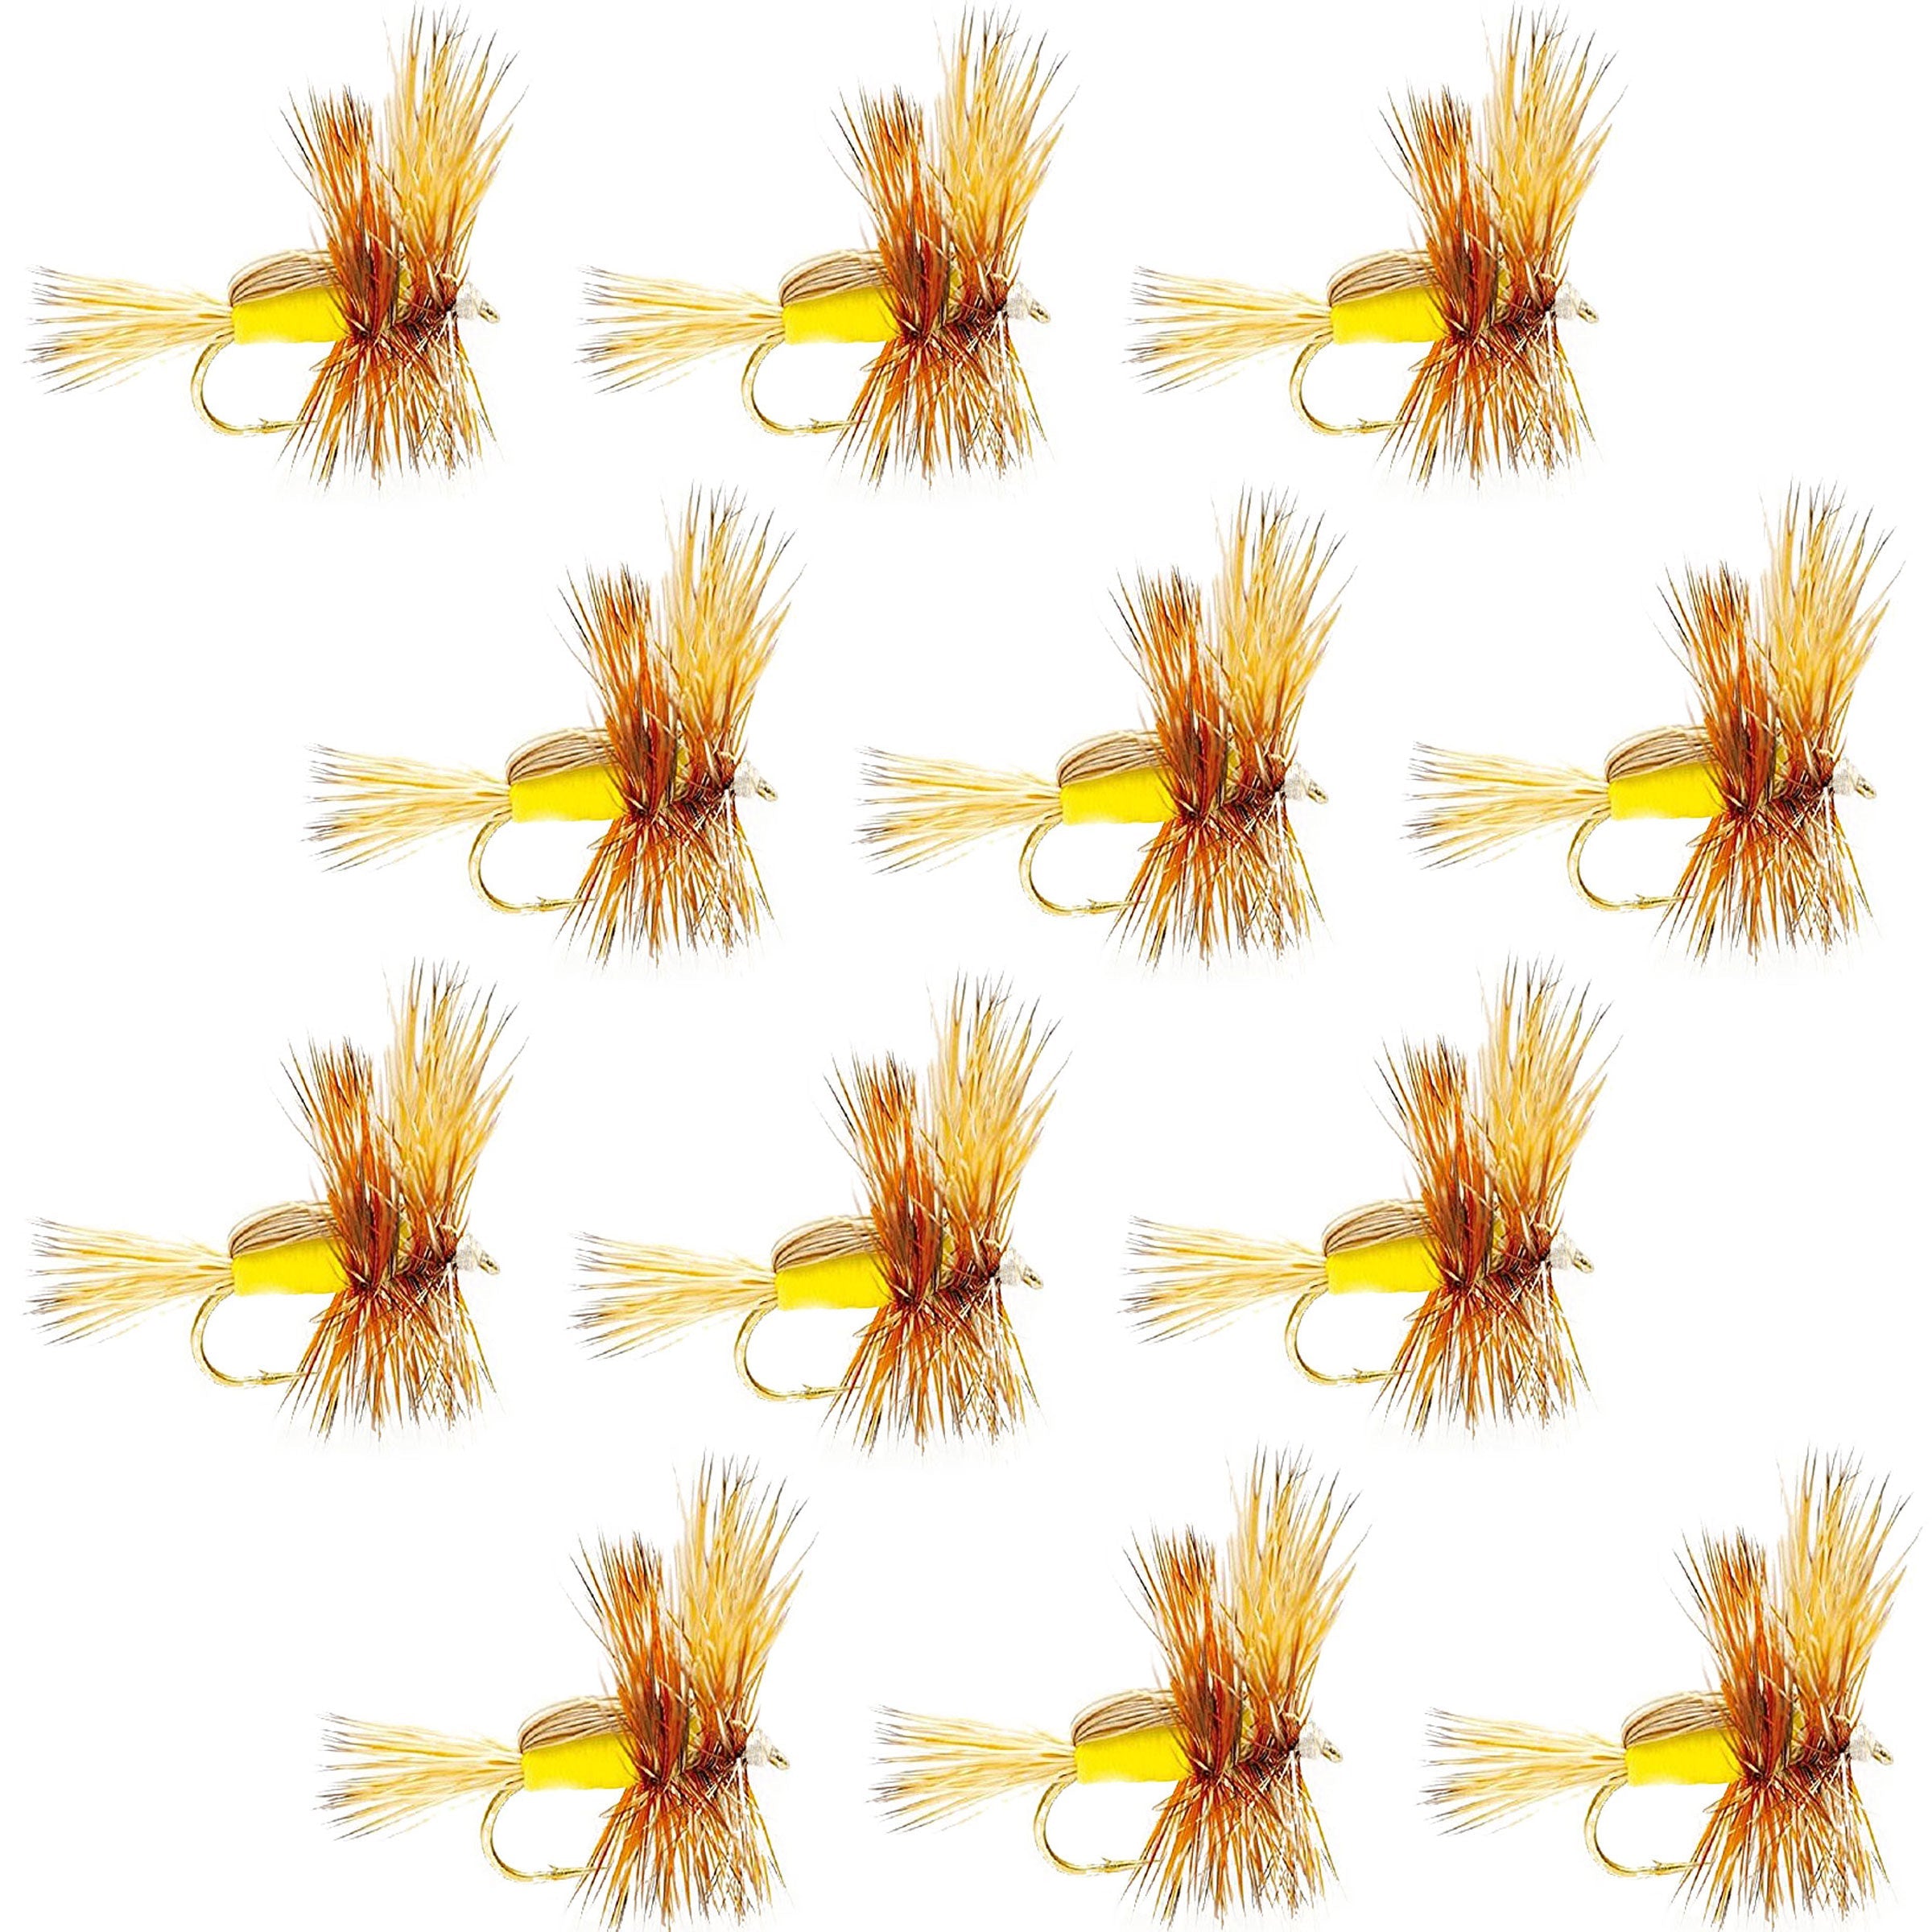 Barbless Yellow Humpy Classic Hair Wing Dry Fly - 1 Dozen Flies Hook Size 16